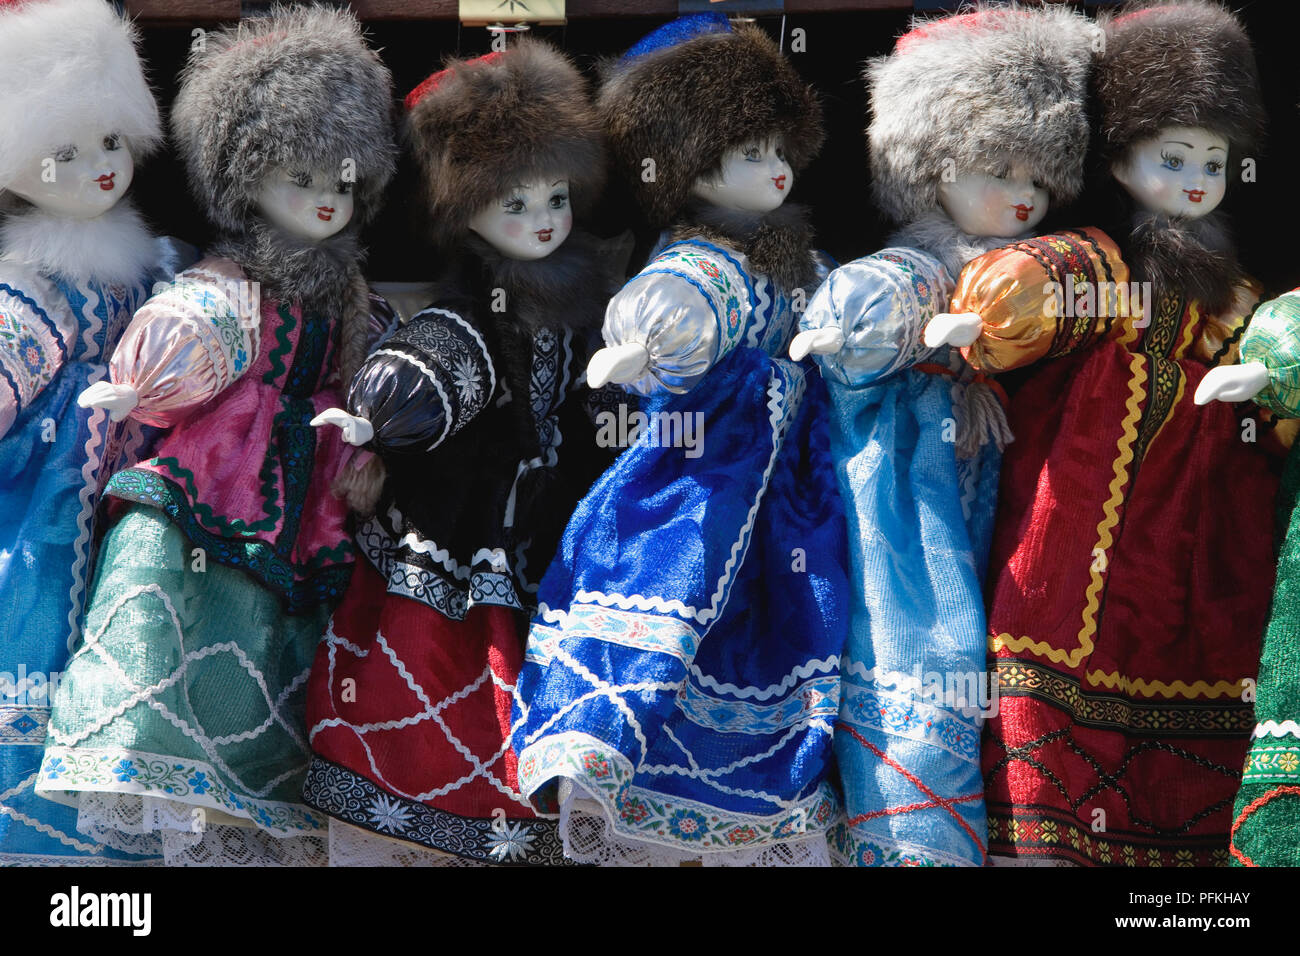 Russia, St Petersburg, china dolls on market stall wearing traditional Russian costumes Stock Photo